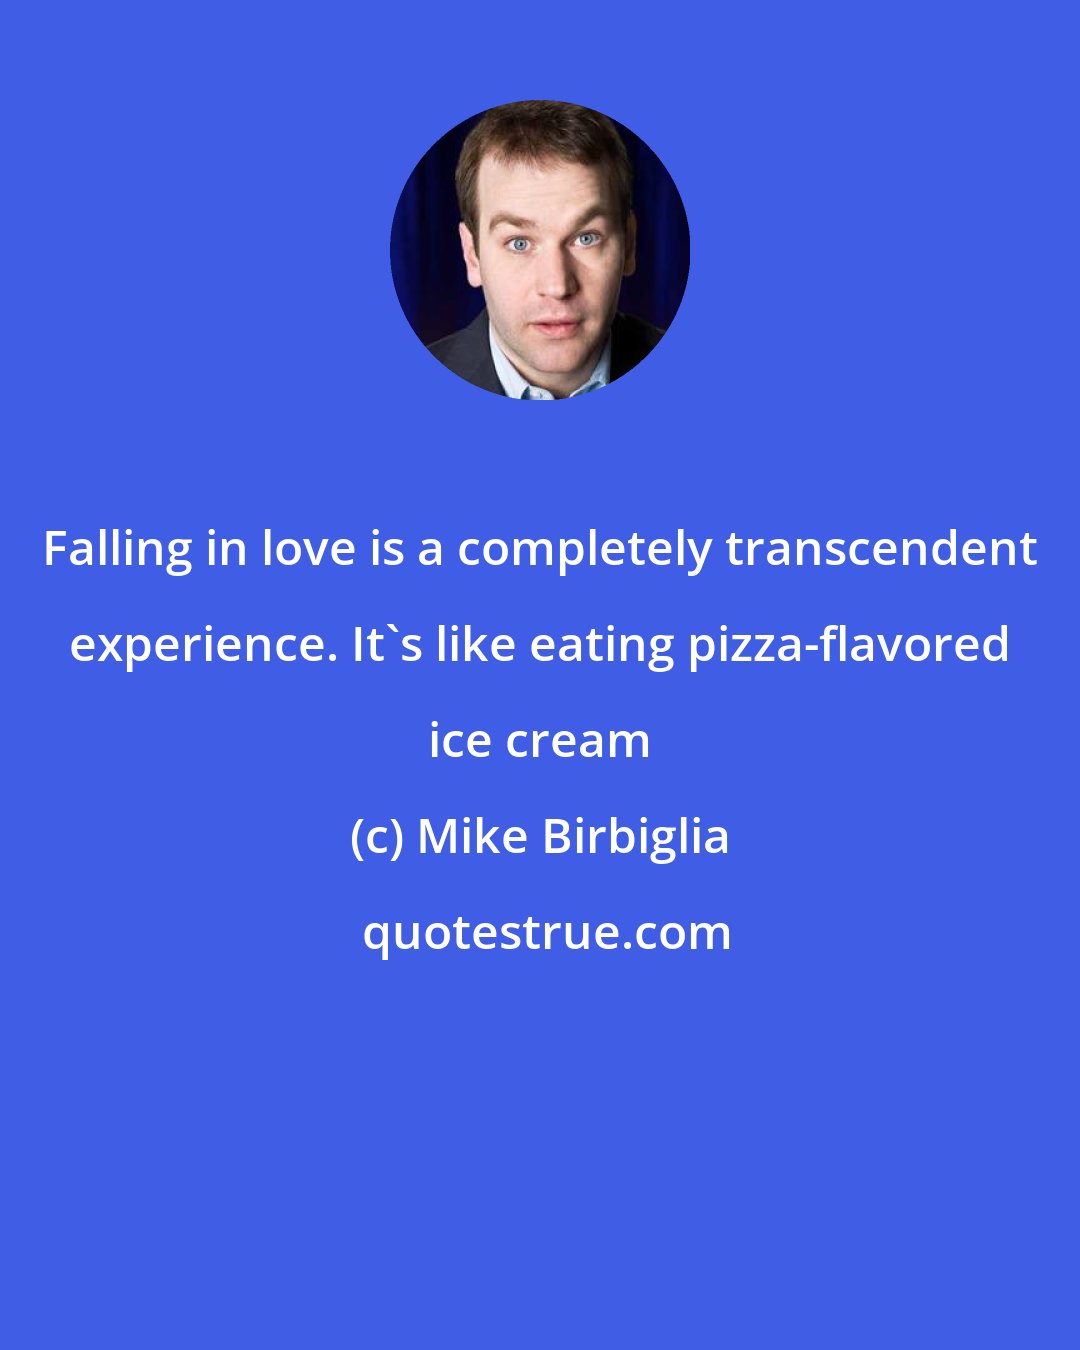 Mike Birbiglia: Falling in love is a completely transcendent experience. It's like eating pizza-flavored ice cream